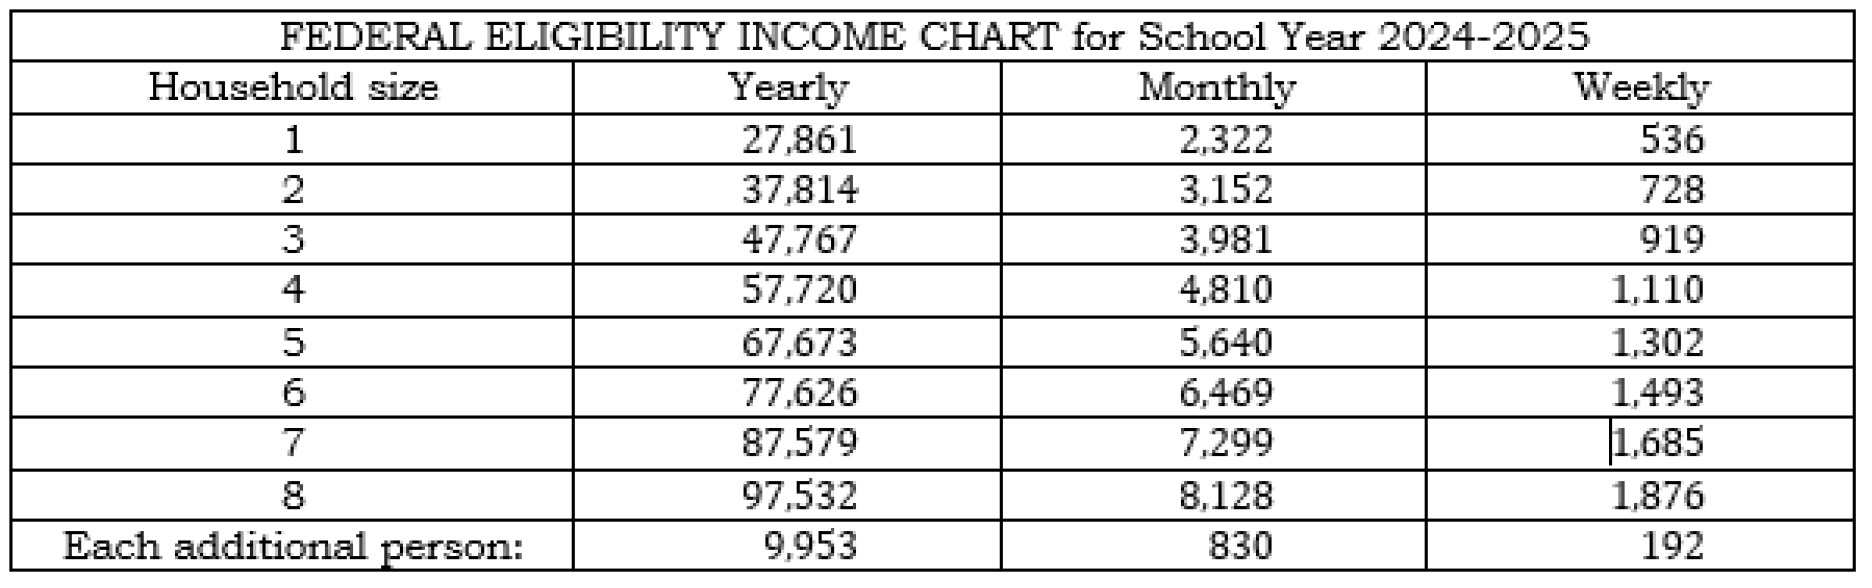 eligibility income chart